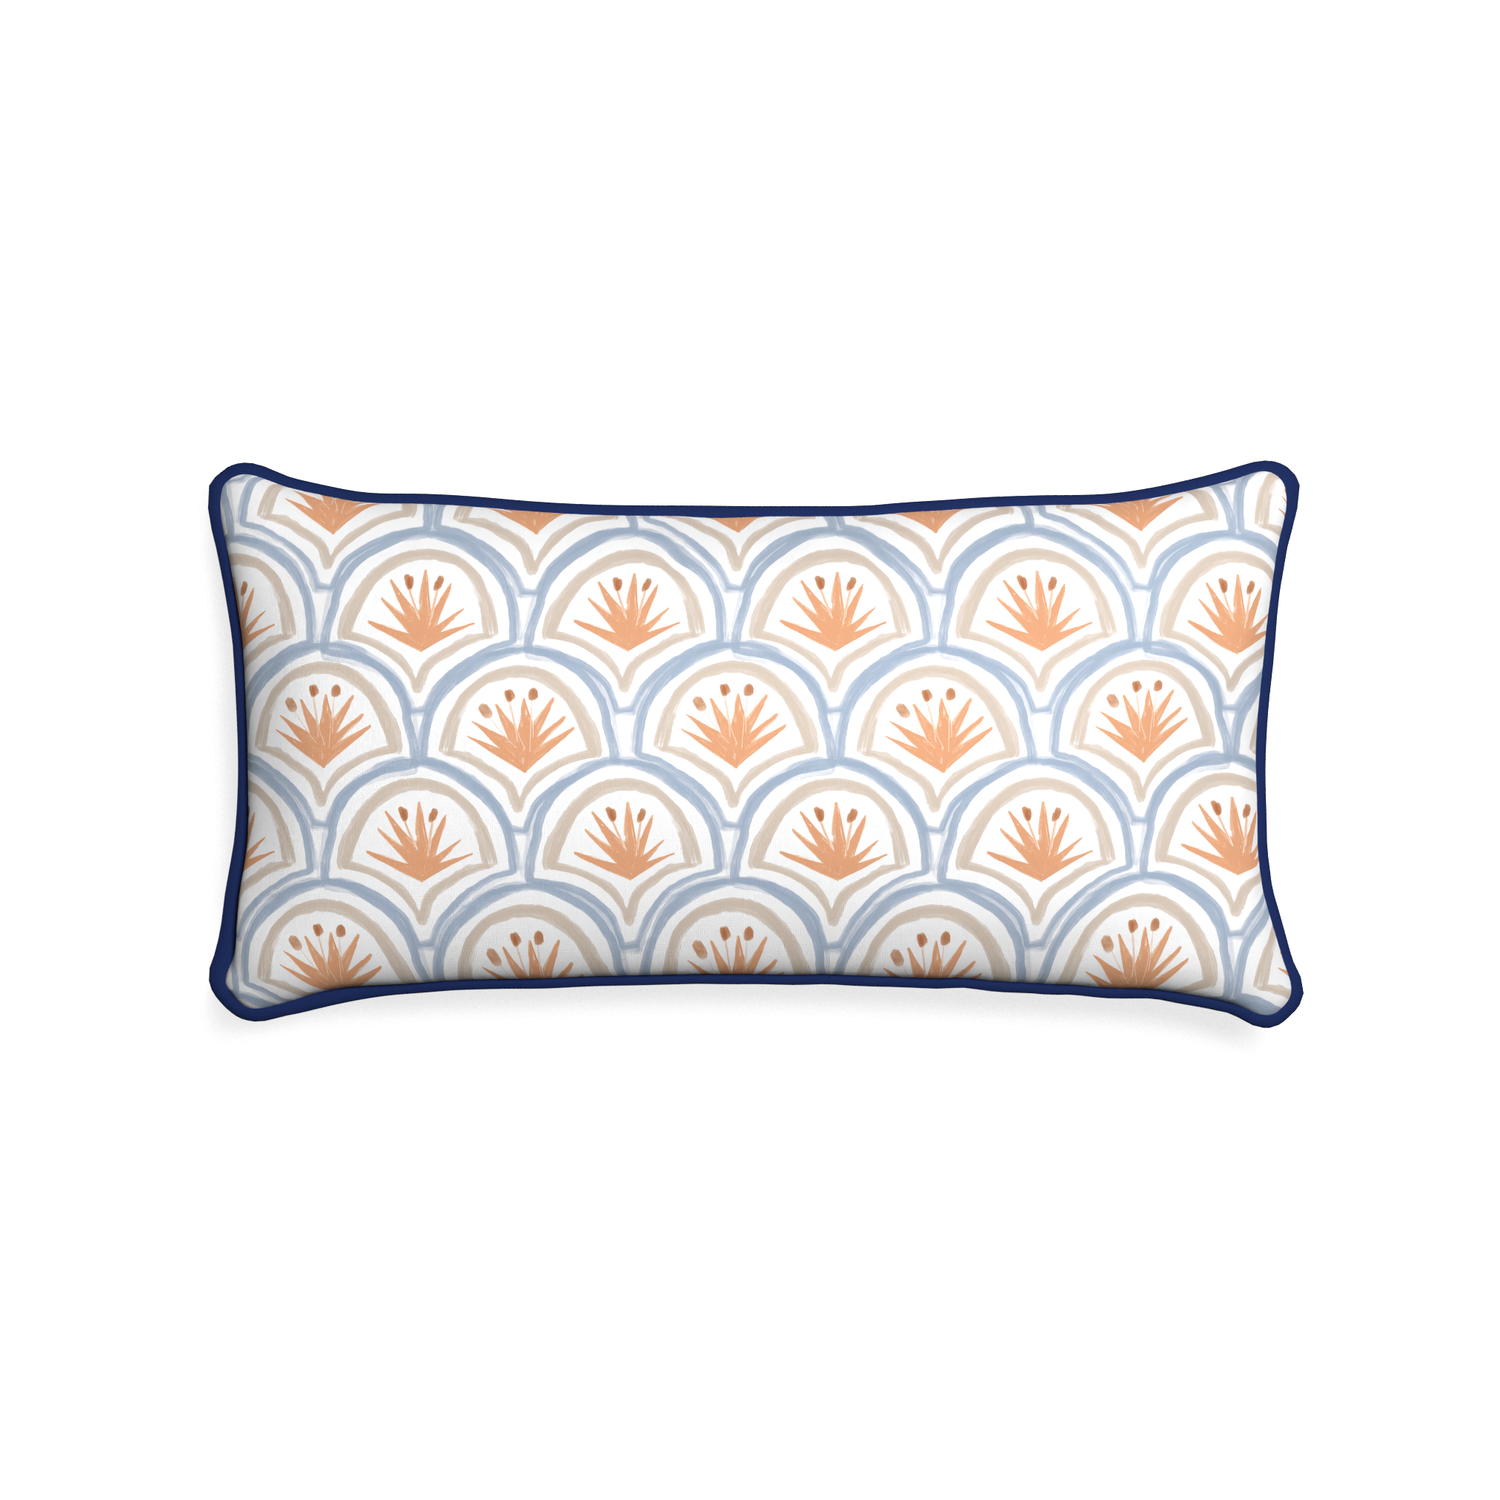 Midi-lumbar thatcher apricot custom art deco palm patternpillow with midnight piping on white background